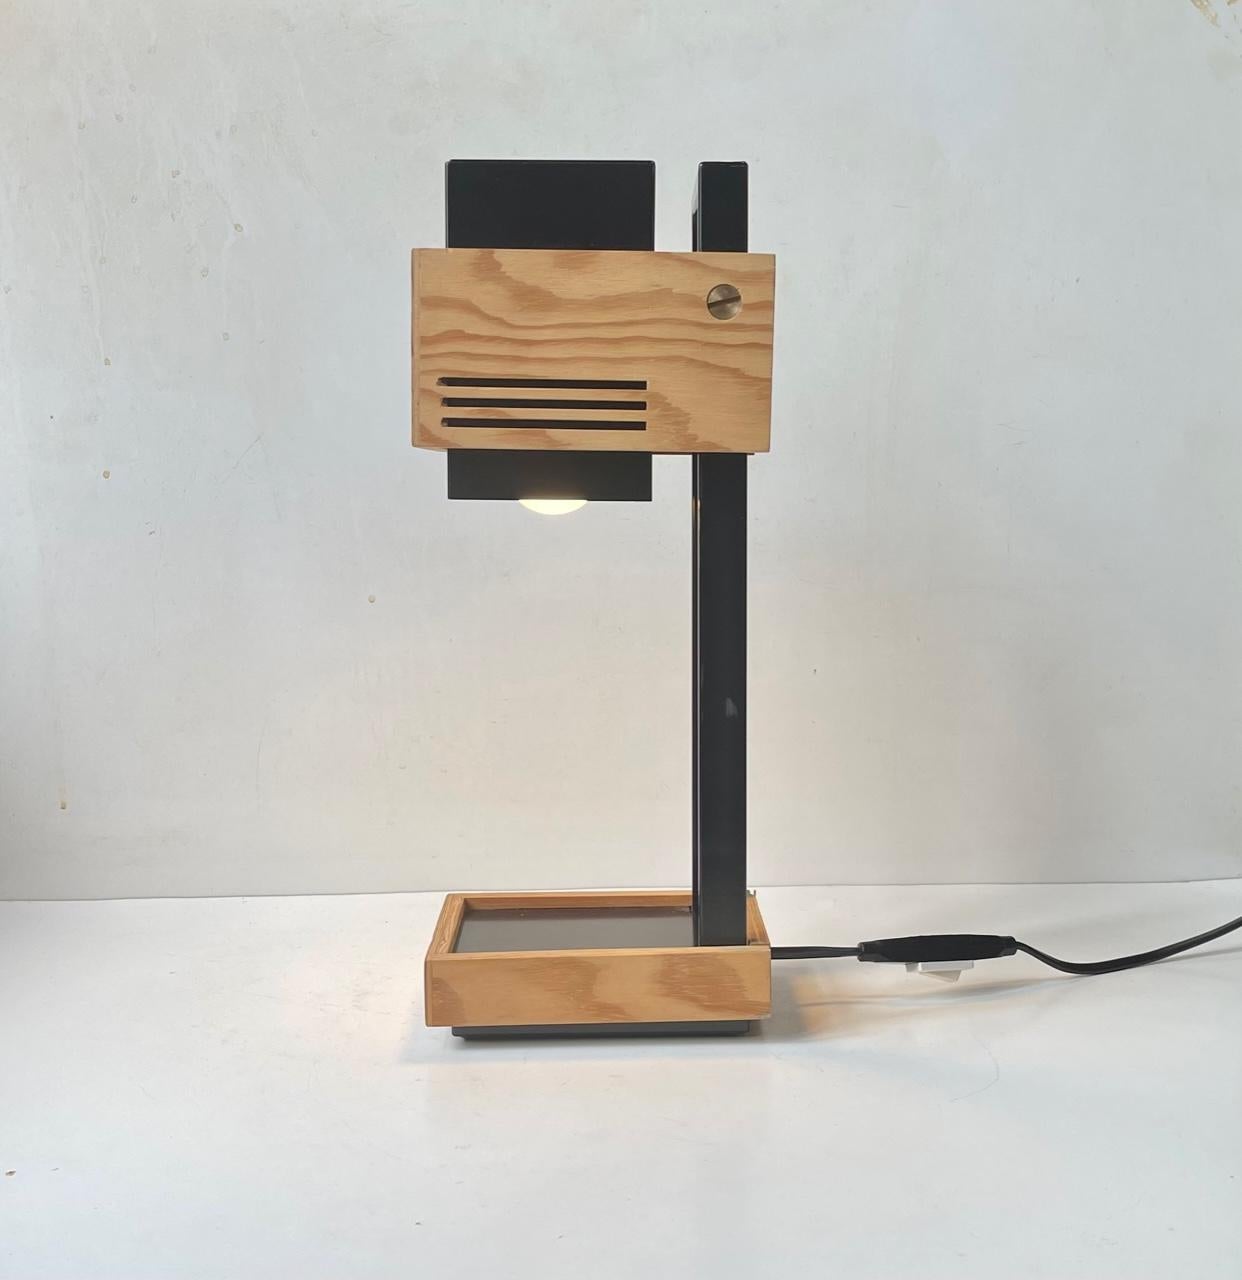 Claus Bolby Cubist Table Lamp in Plywood and Steel for Cebo Industri, 1970s For Sale 2